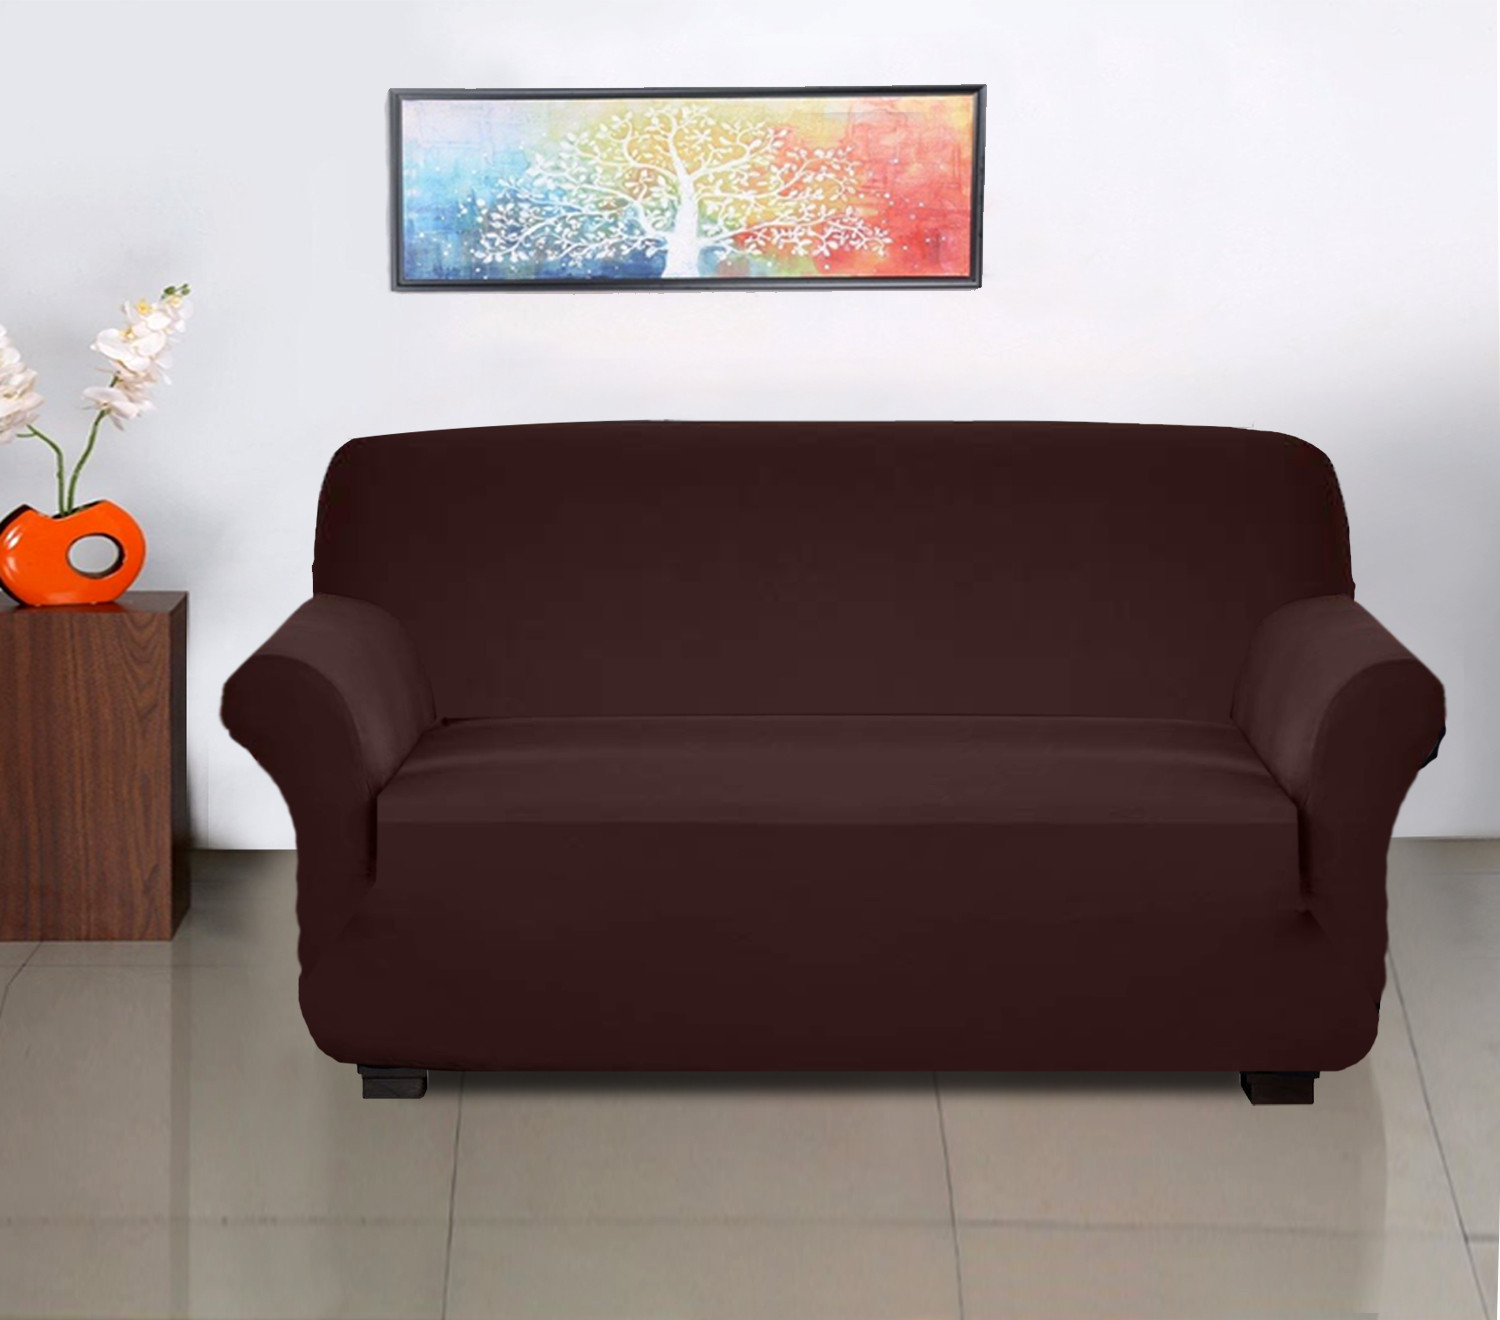 Kuber Industries Stretchable, Non-Slip Polyster 3 Seater Sofa Cover/Slipcover/Protector With Foam Stick (Brown)